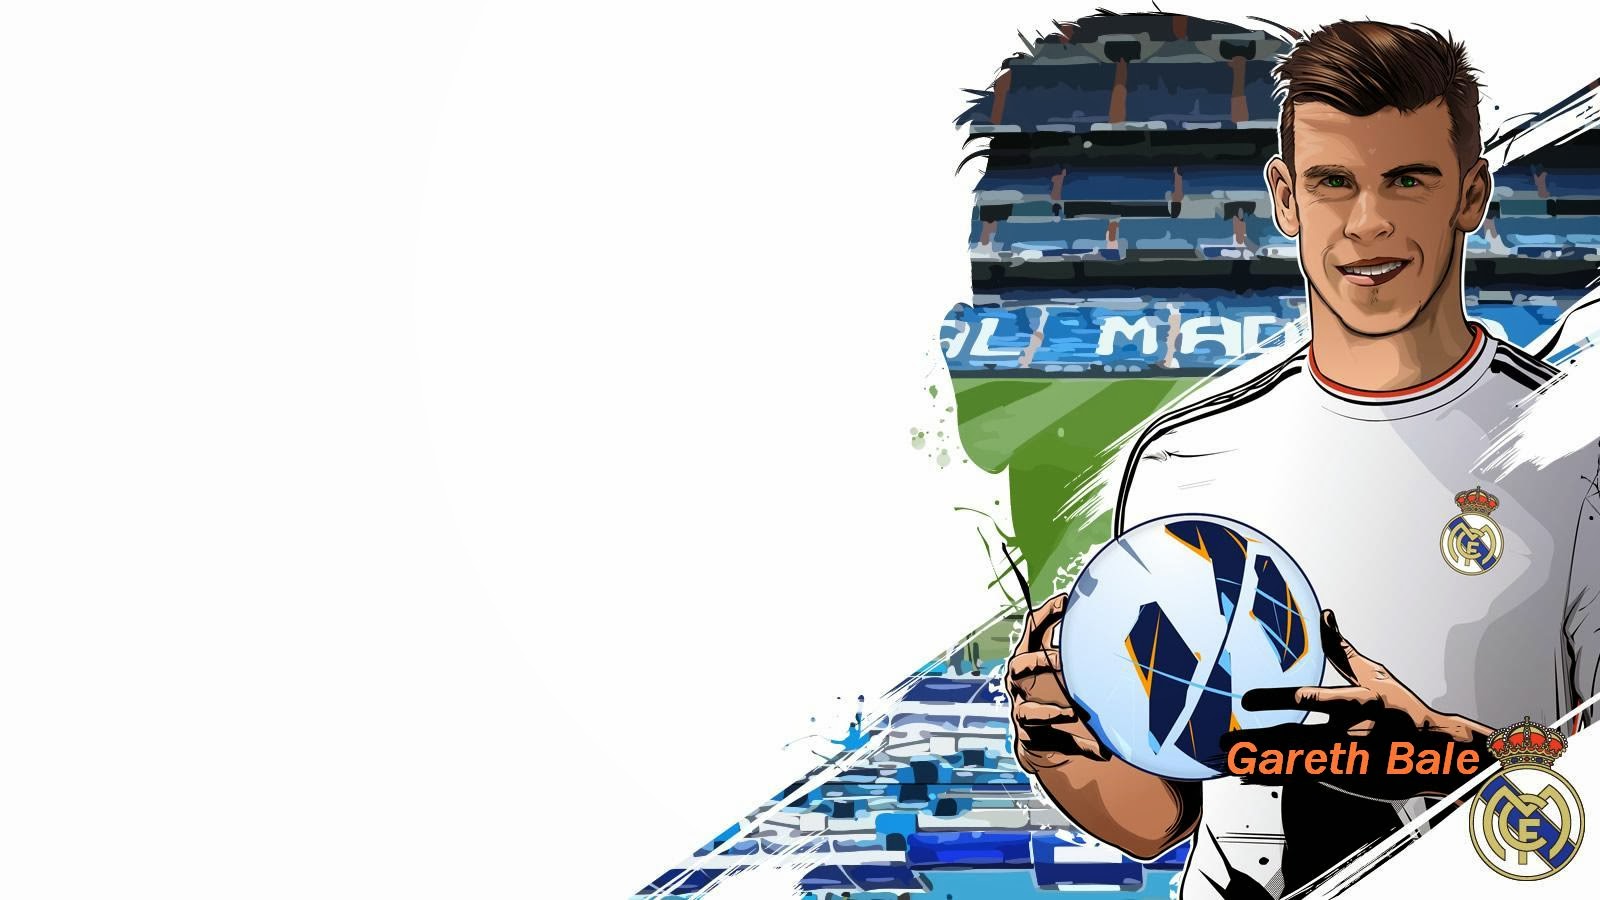 Gareth Bale Wallpapers 36 images inside